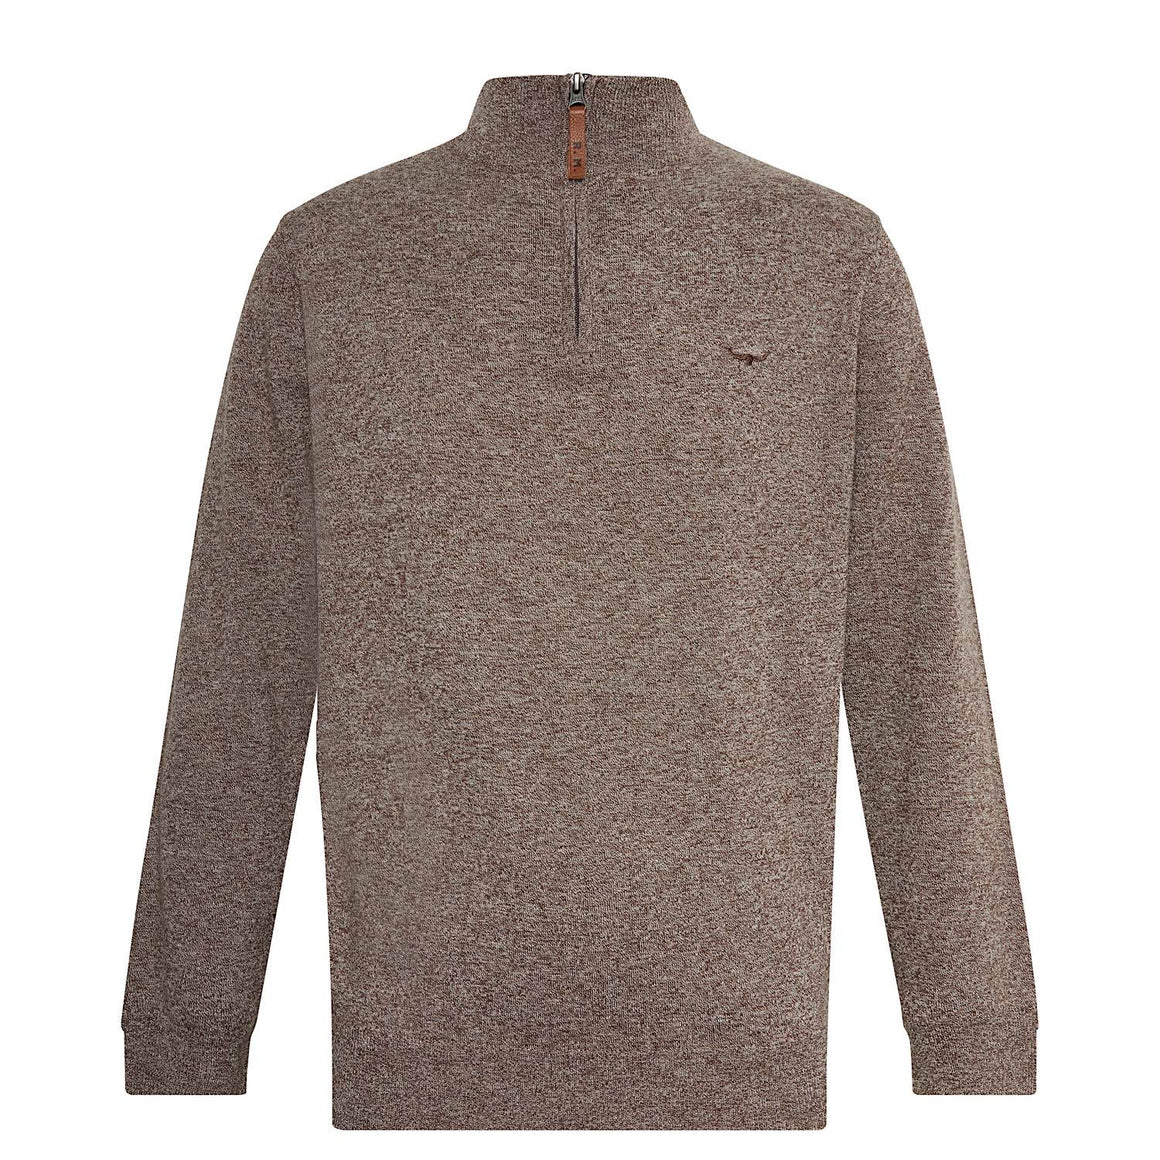 rm williams ernest sweater